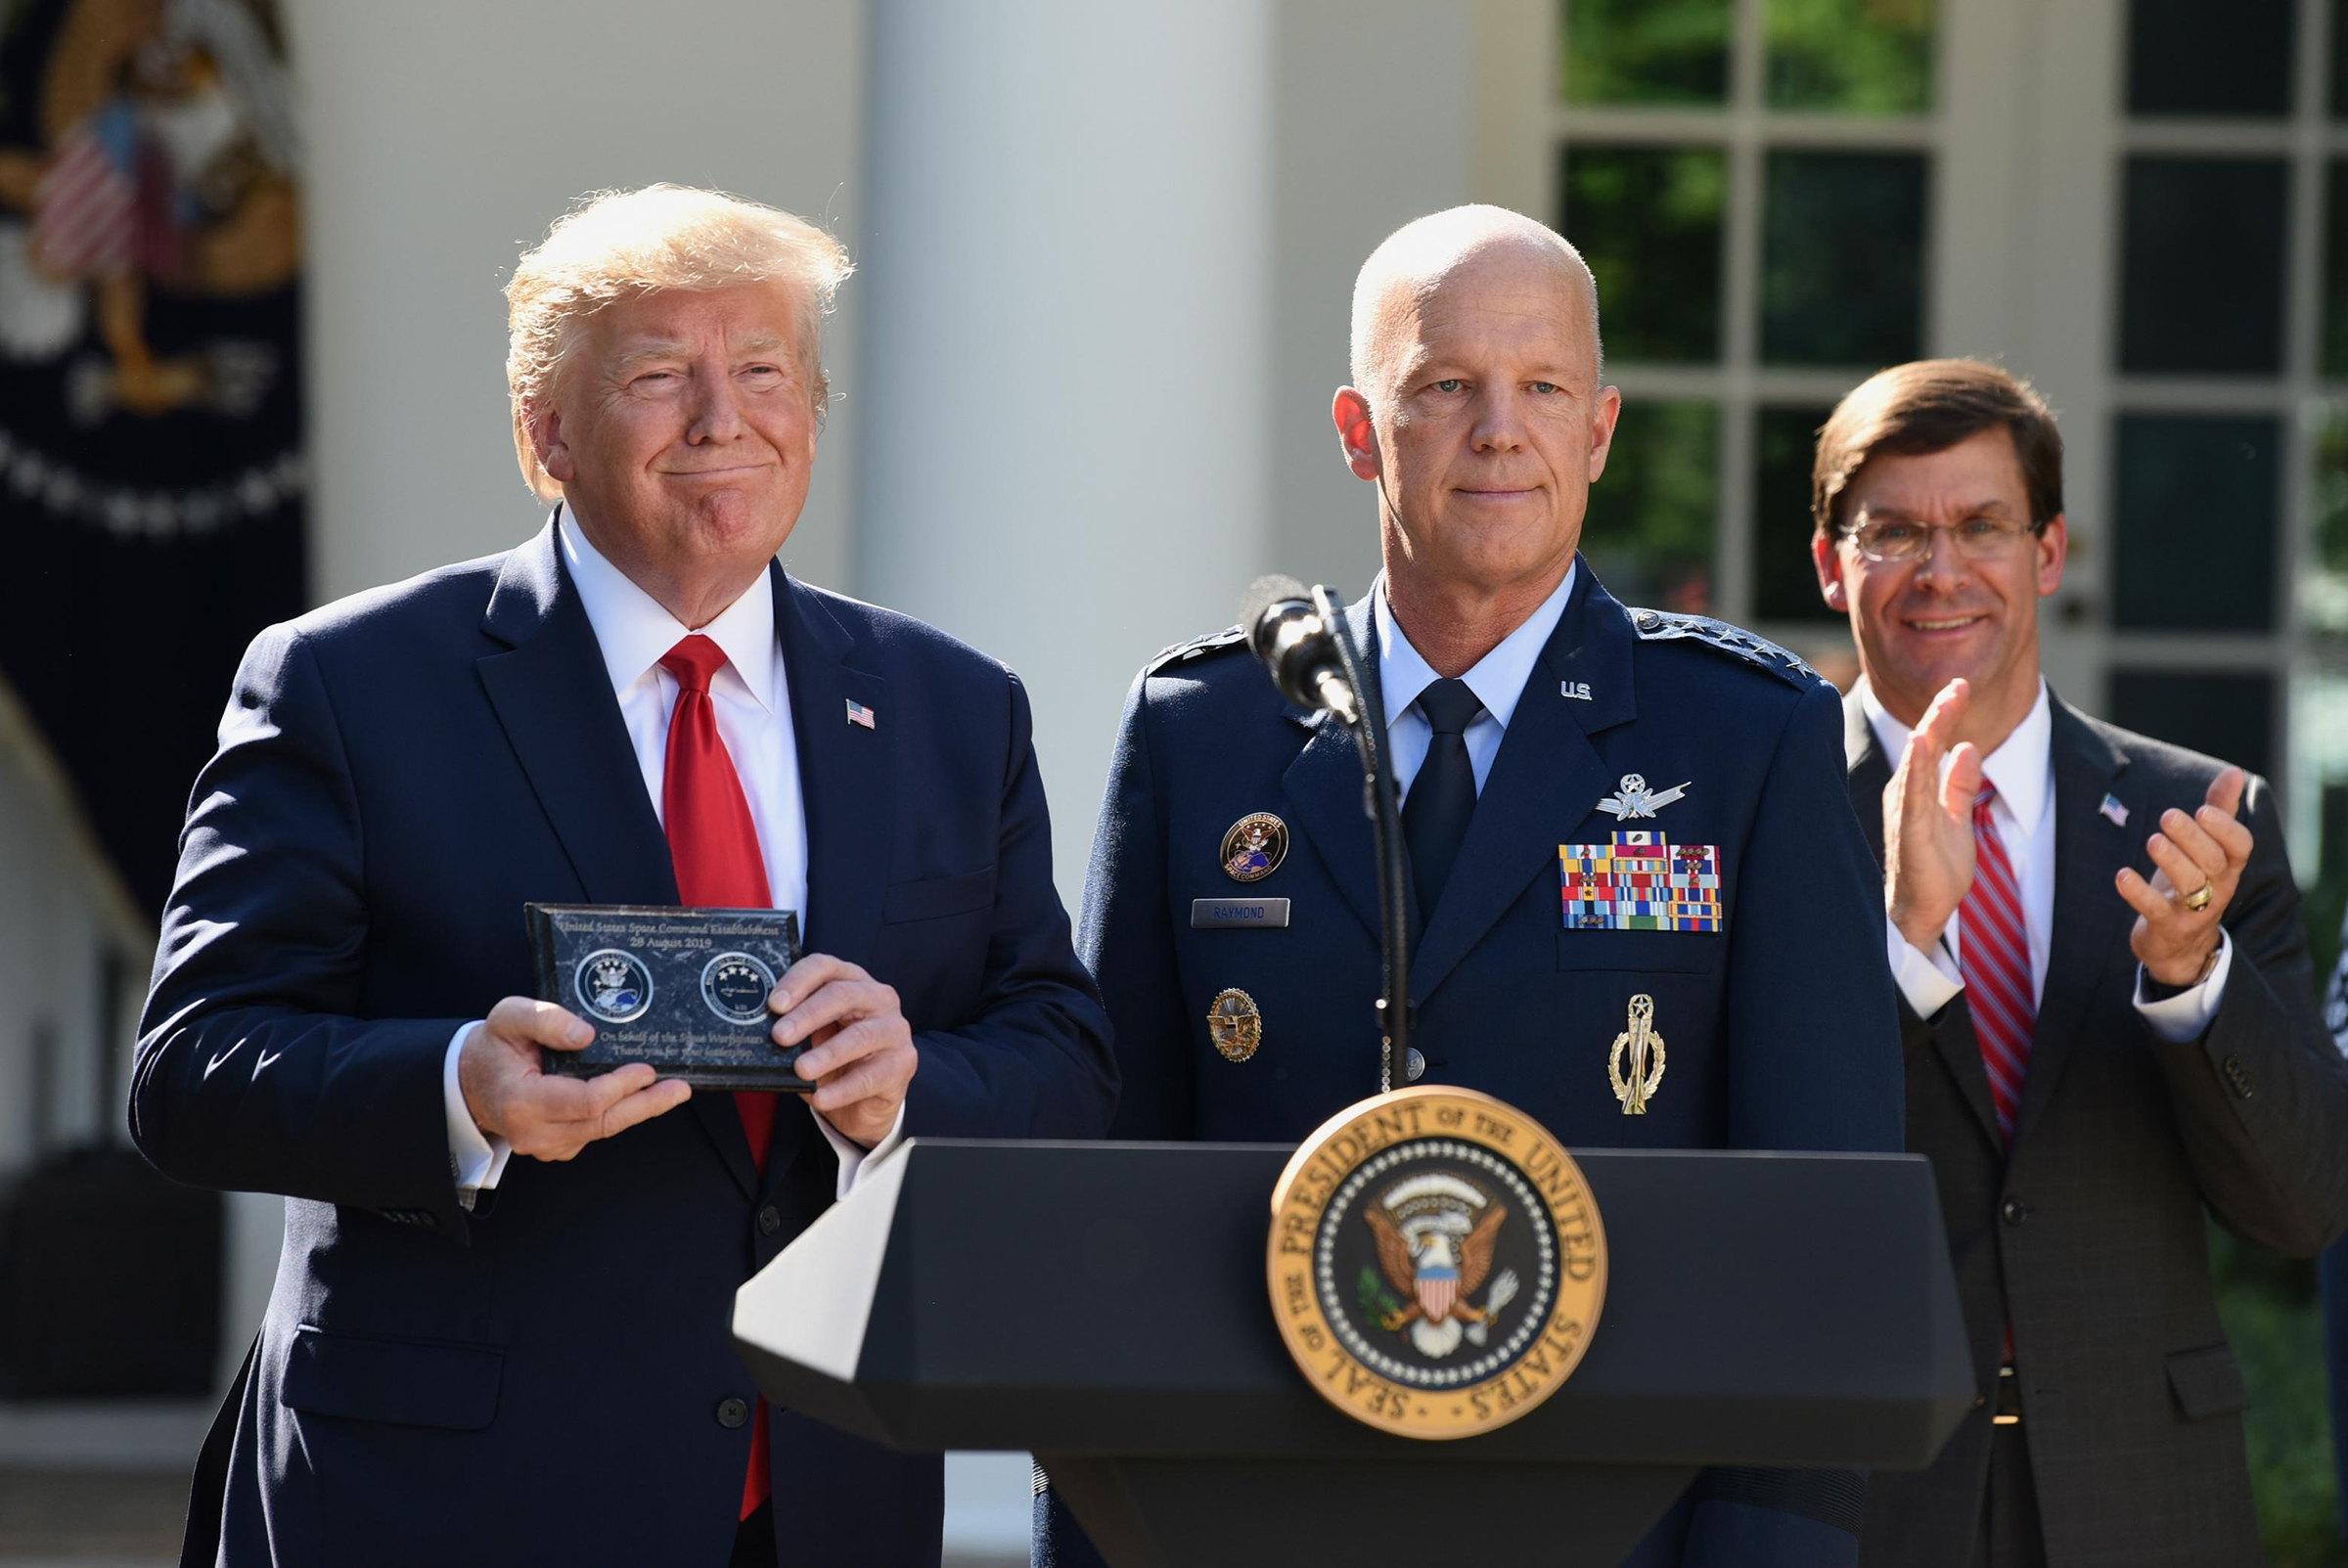 President Donald Trump and General John "Jay" Raymond attend a ceremony marking the establishment the U.S. Space Command at the White House on Aug. 29, 2019. (Chen Mengtong—China News Service/VCG via Getty Images)